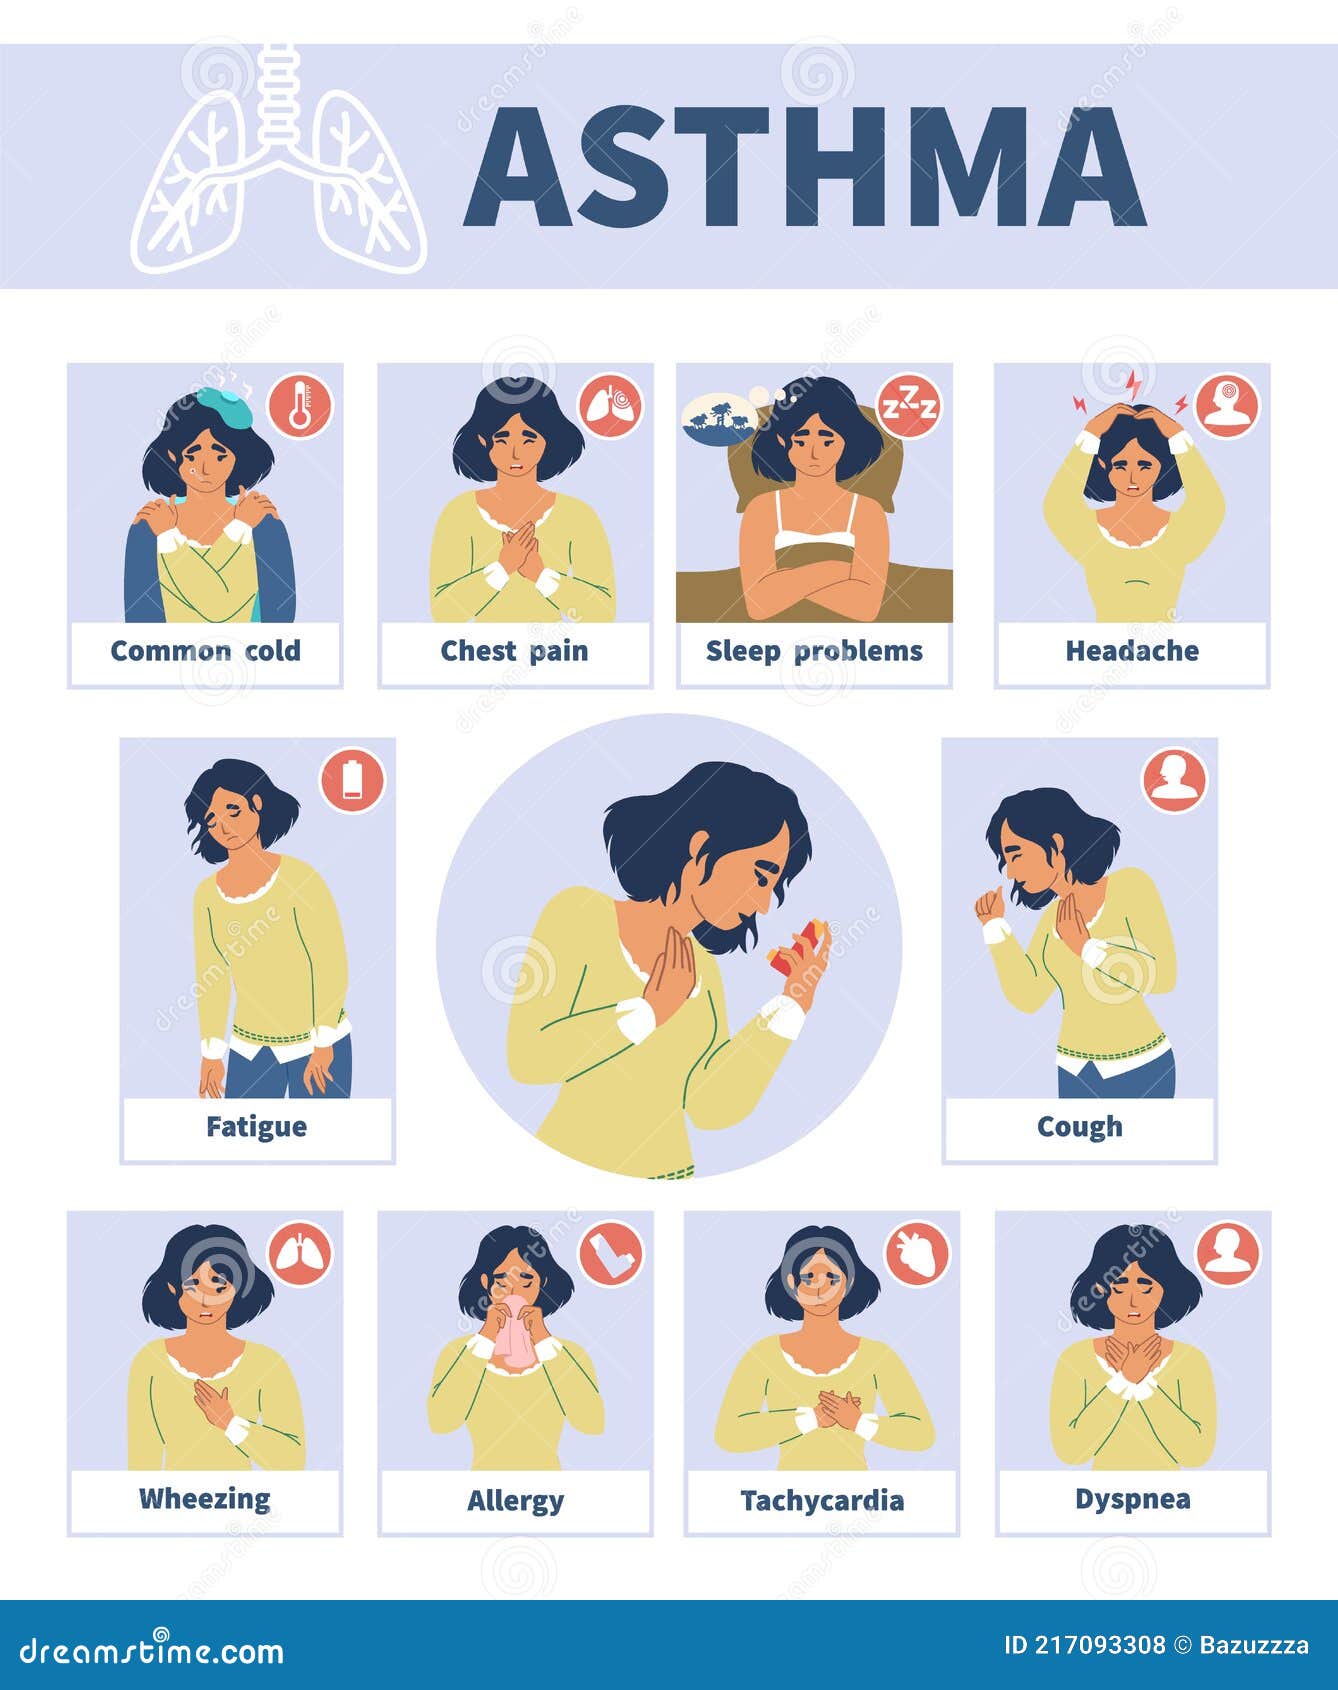 asthma signs and symptoms  infographic medical poster. asthmatic problems. cough, chest pain, difficulty breathing